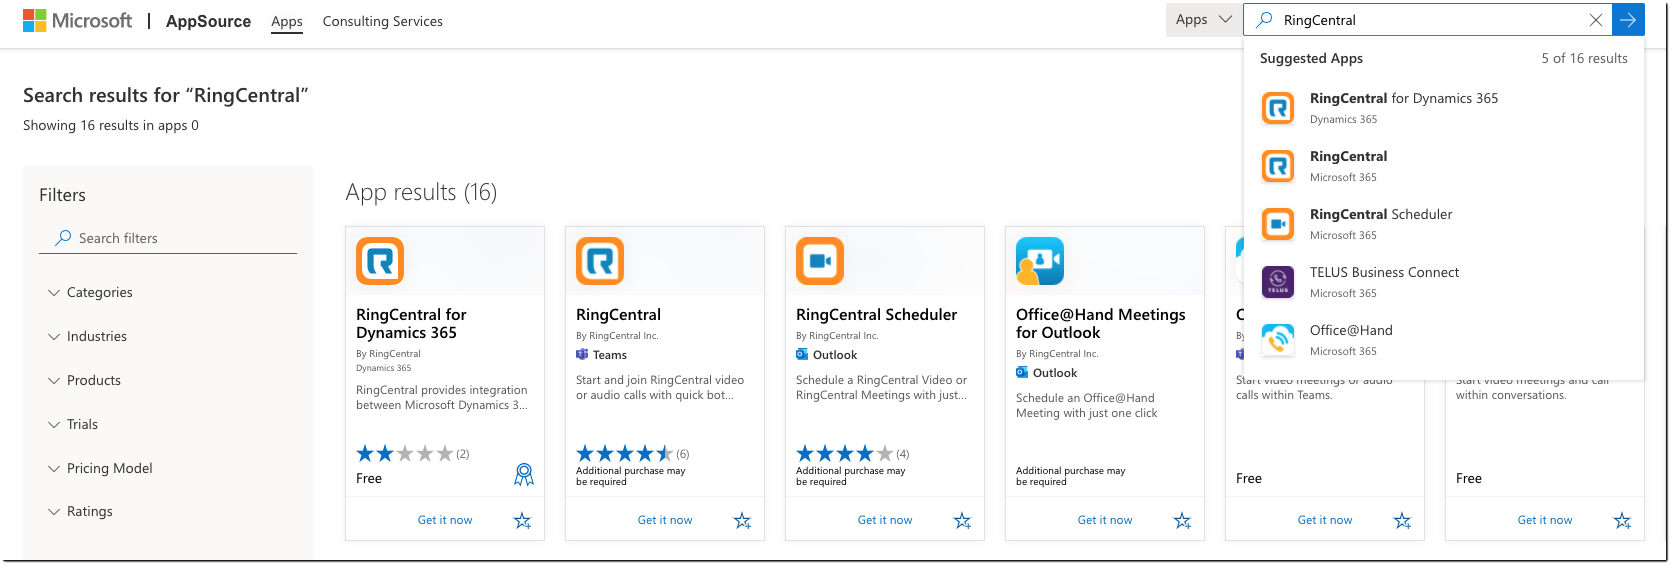 RingCentral on the App Store